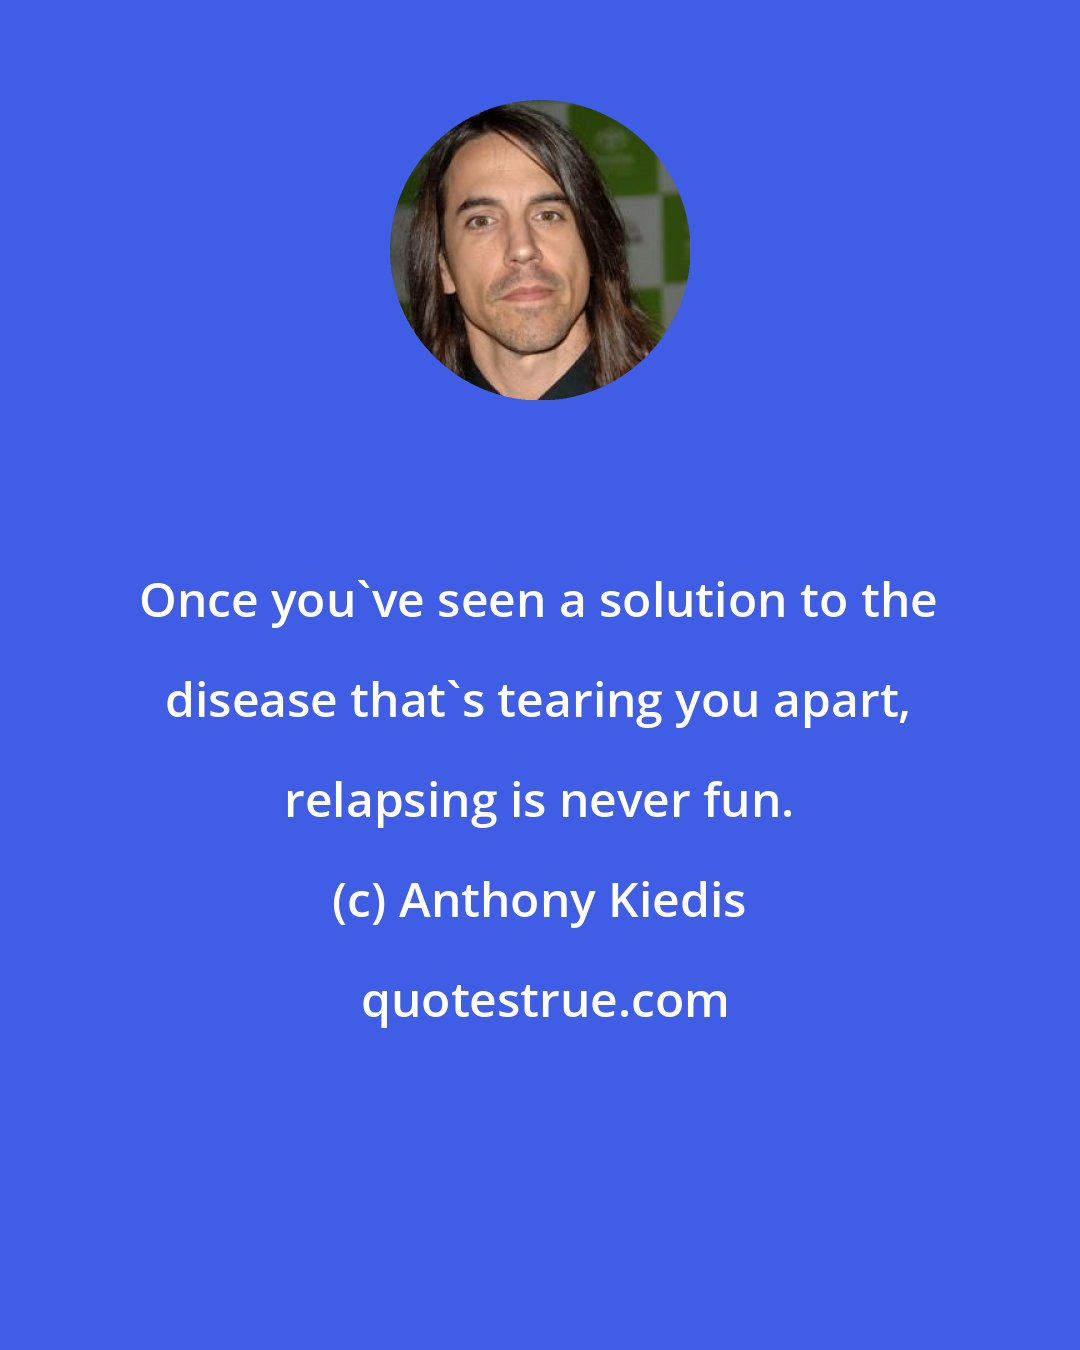 Anthony Kiedis: Once you've seen a solution to the disease that's tearing you apart, relapsing is never fun.